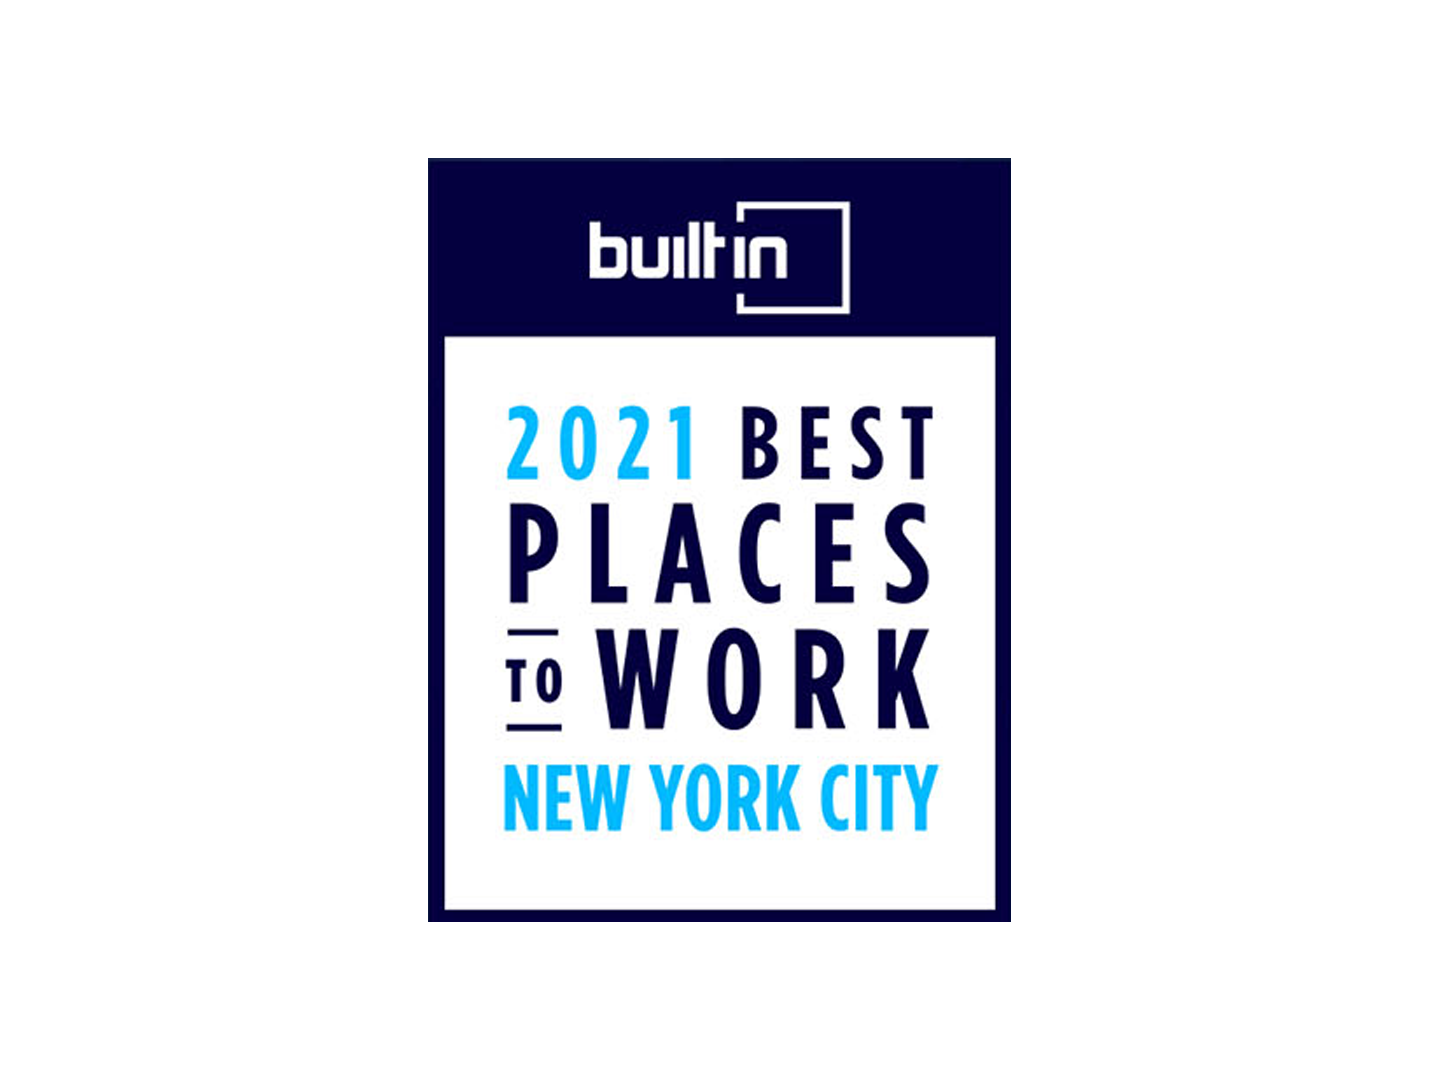 Built In NYC Honors Dataminr in Its Esteemed 2021 Best Places To Work Awards